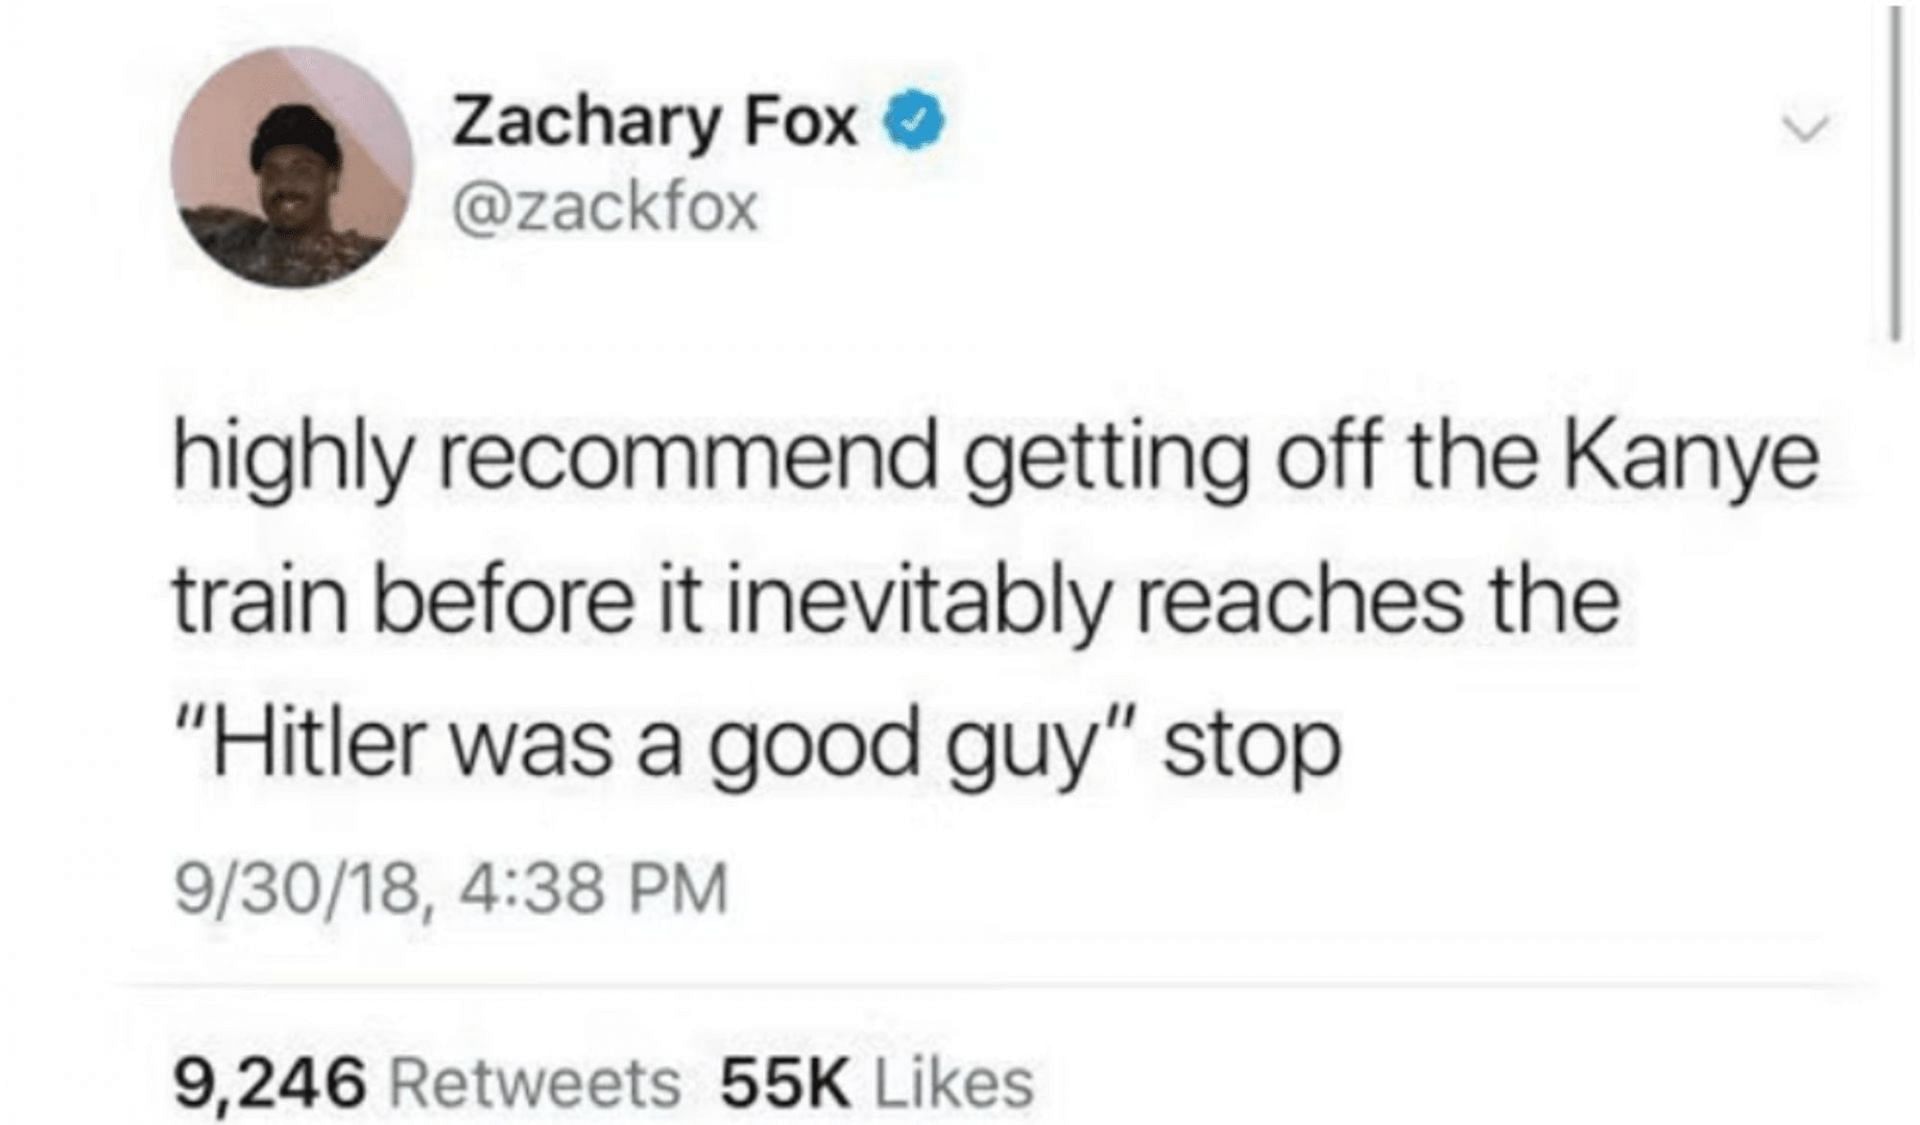 Zachary Fox throws shade at Kanye West (Image via Twitter)